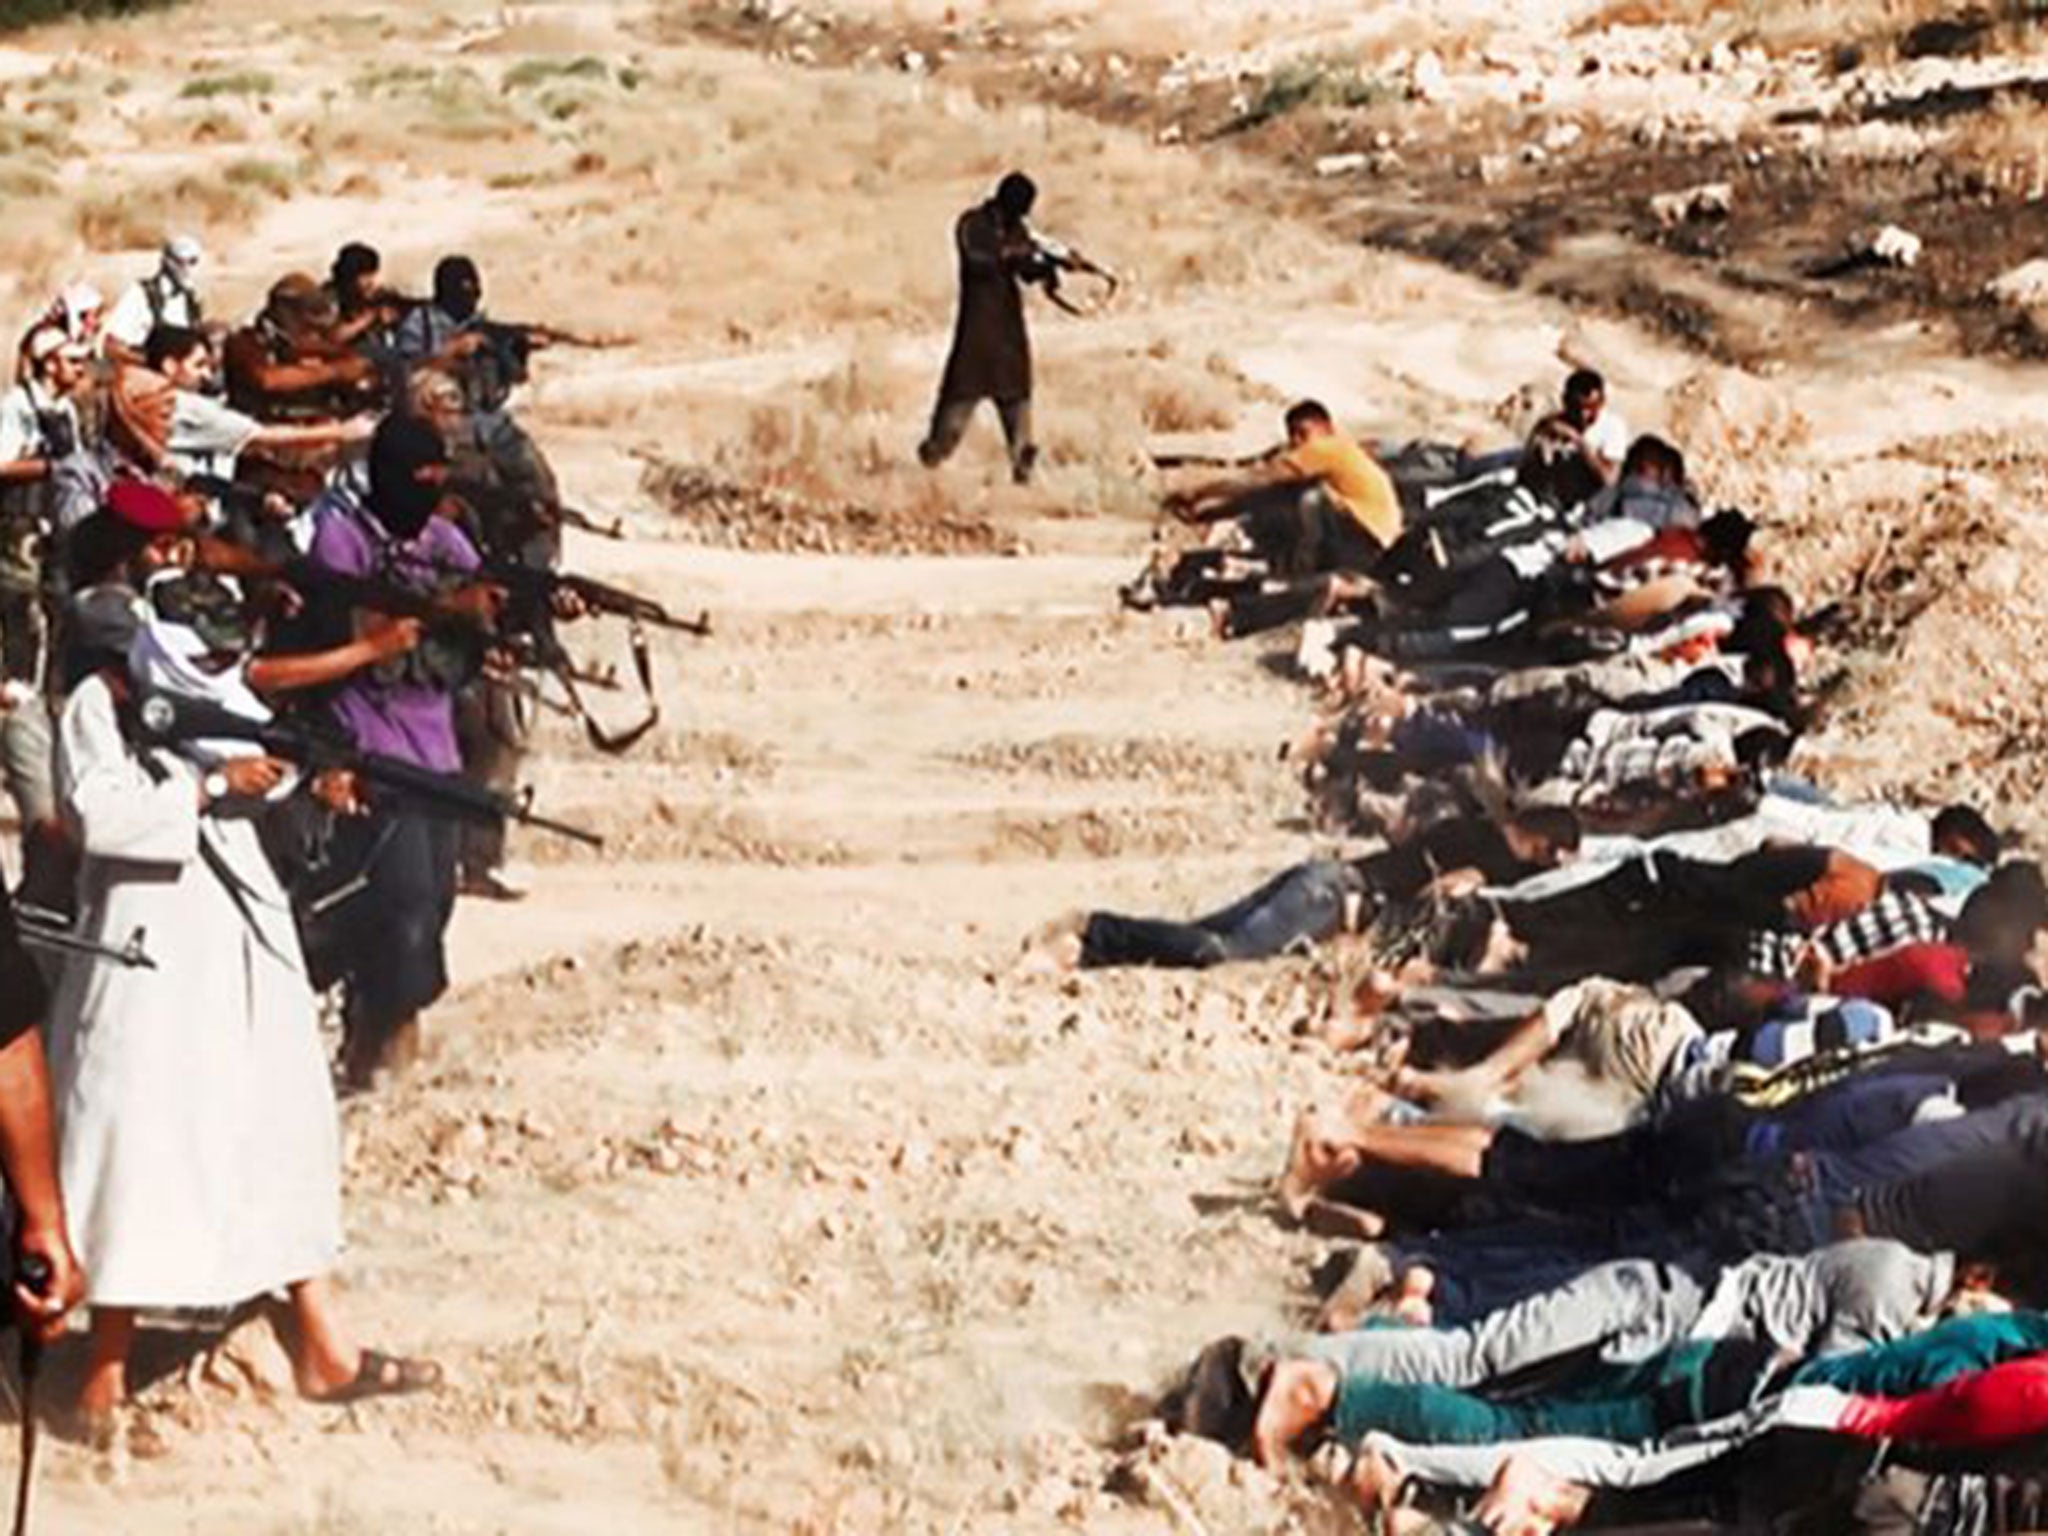 A picture posted on a militant website reportedly shows jihadists from Isis taking aim at captured Iraqi soldiers wearing plain clothes, after taking over a base in Tikrit